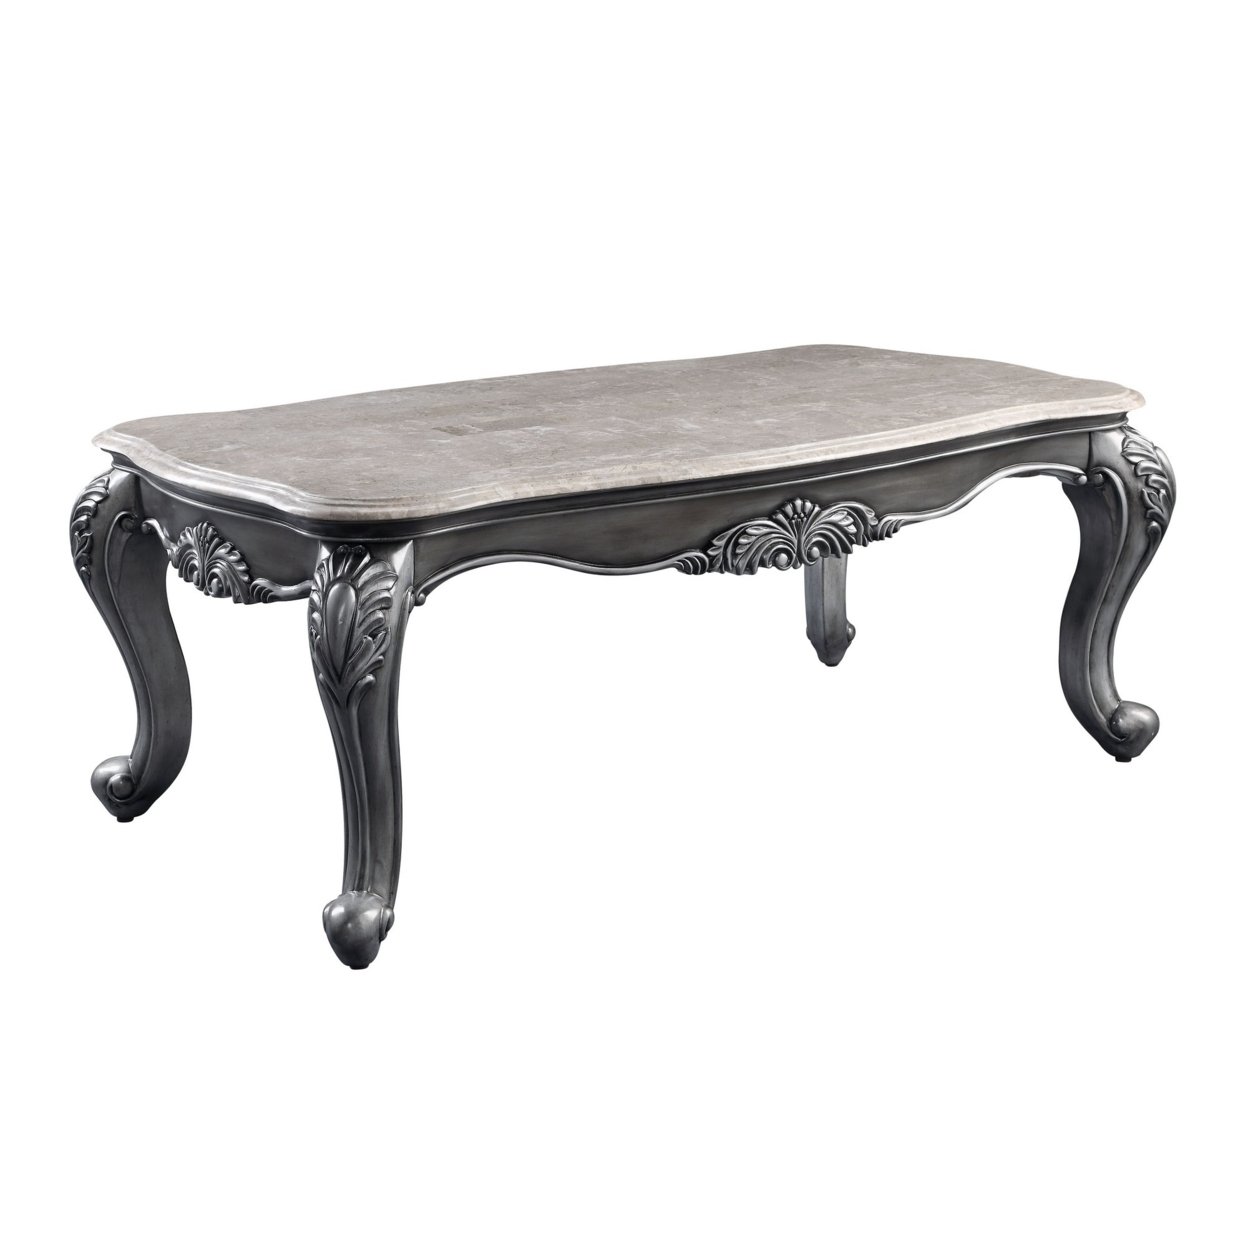 Coffee Table With Marble Top And Queen Anne Legs, Gray- Saltoro Sherpi